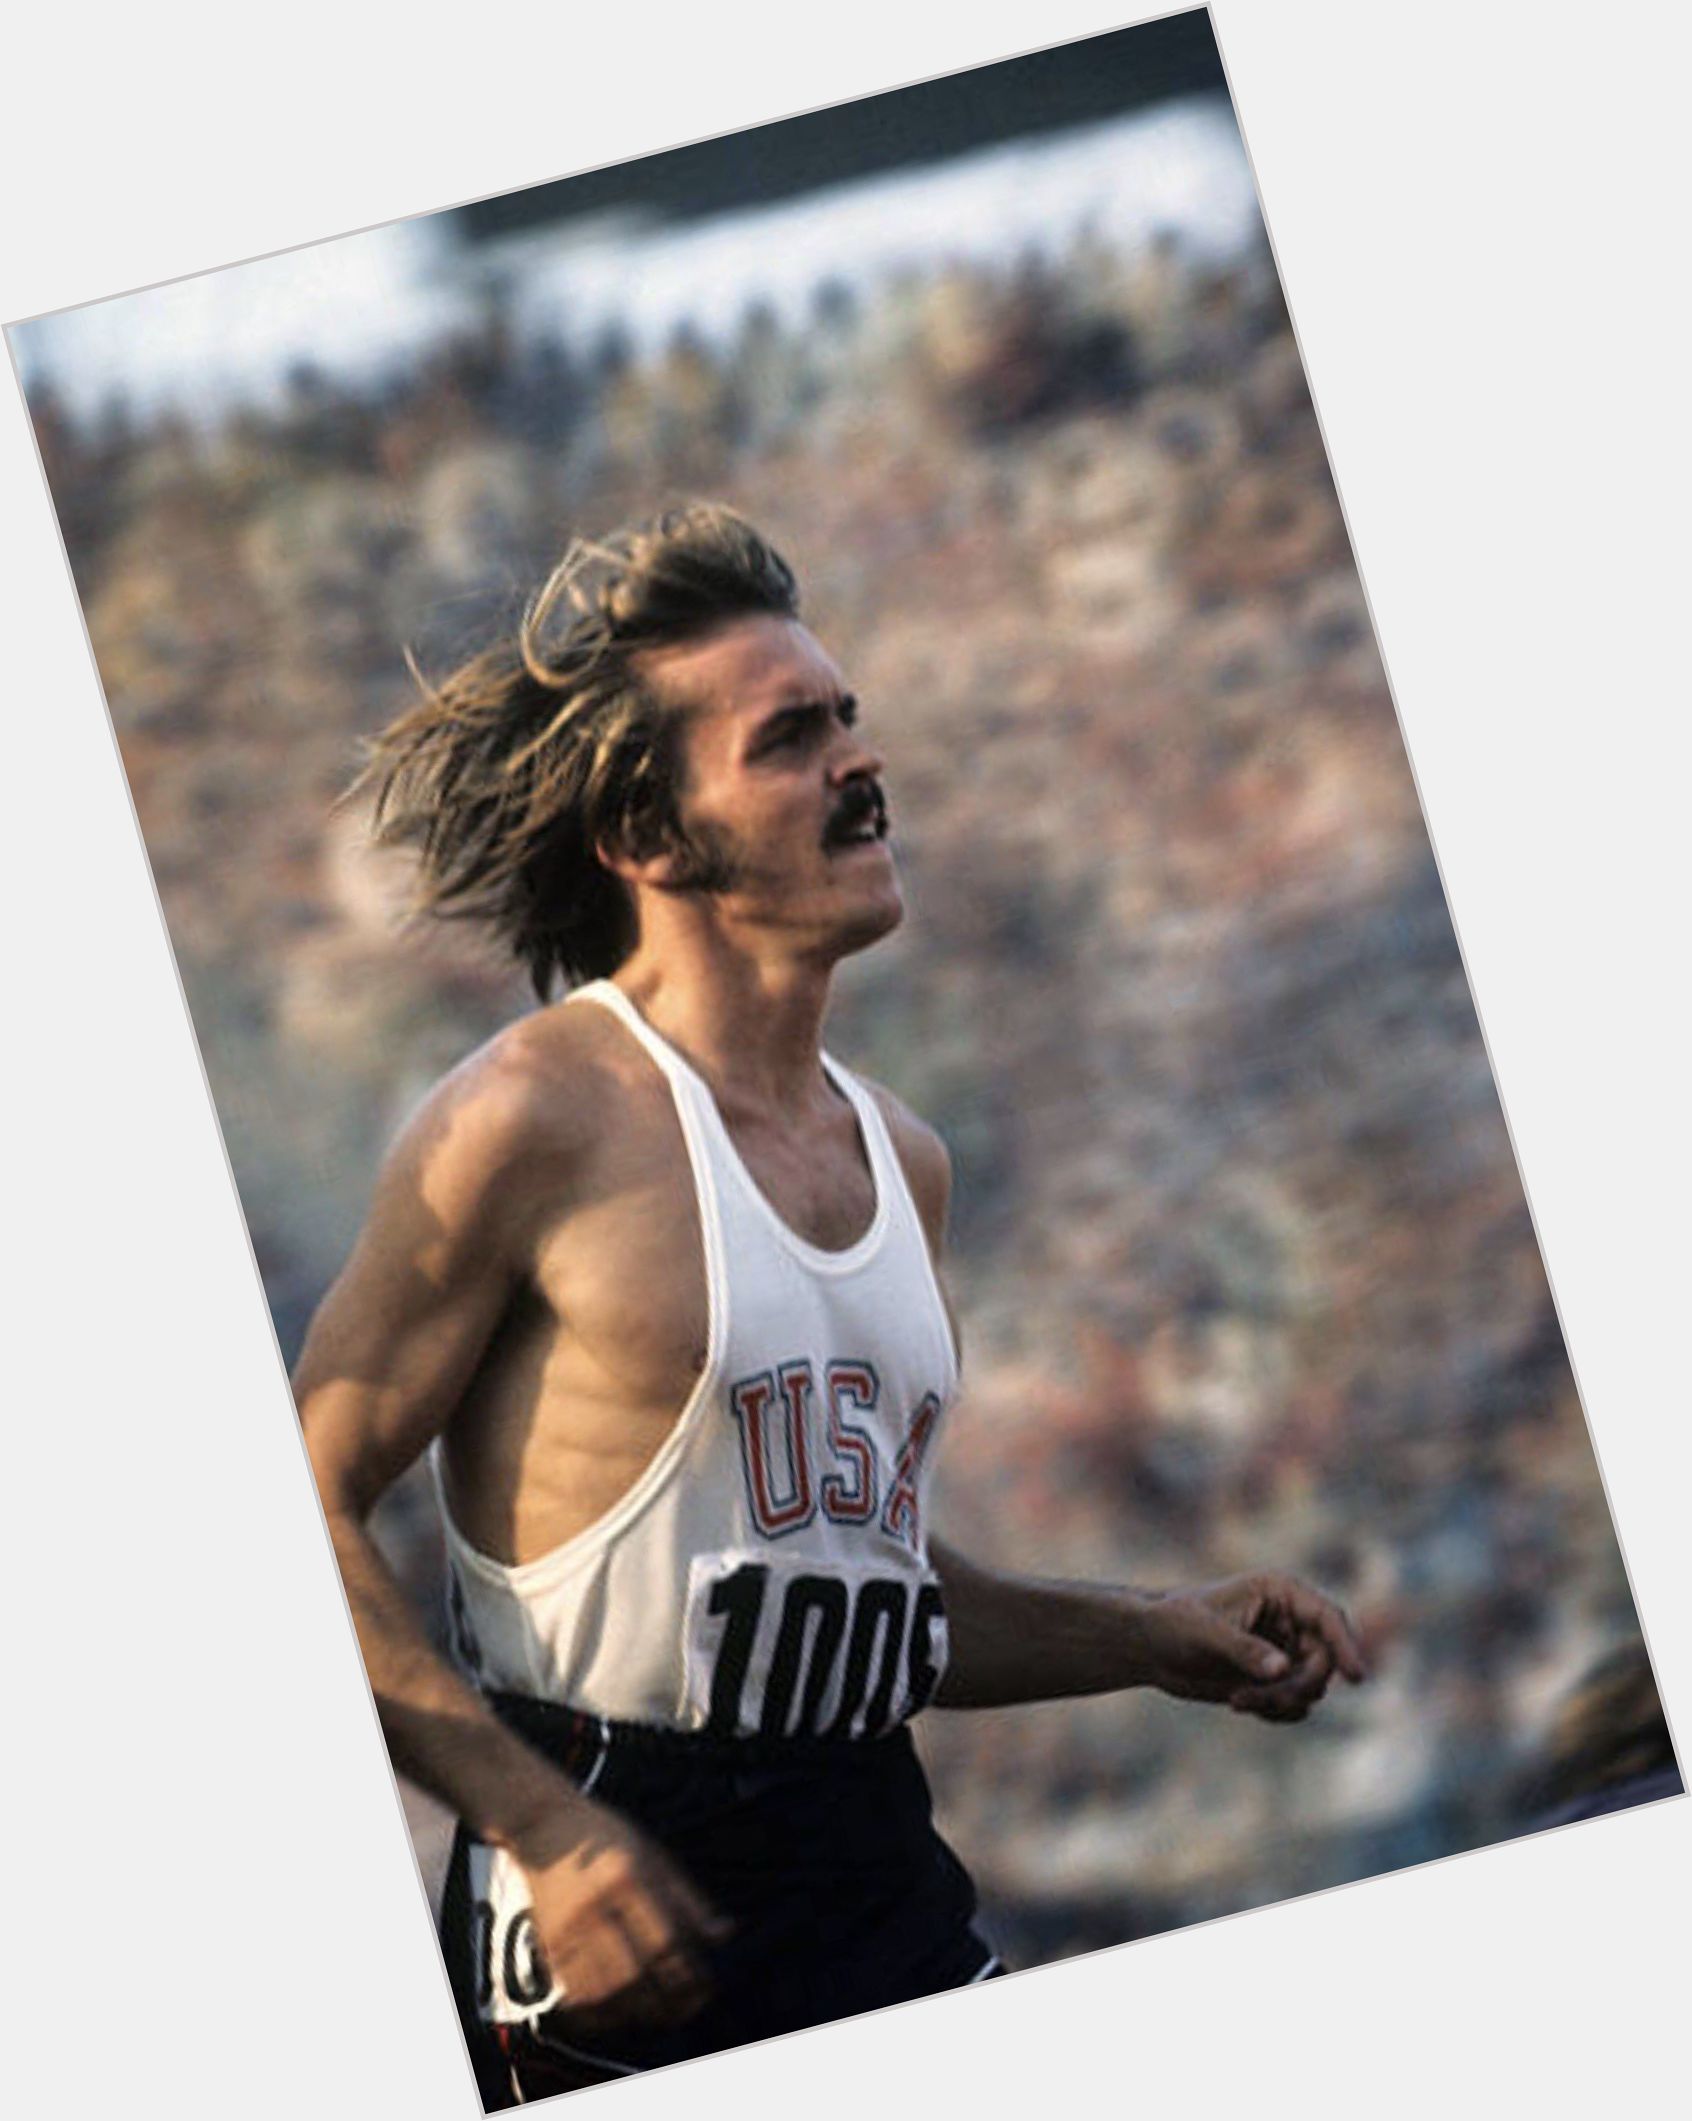 Steve Prefontaine new pic 1